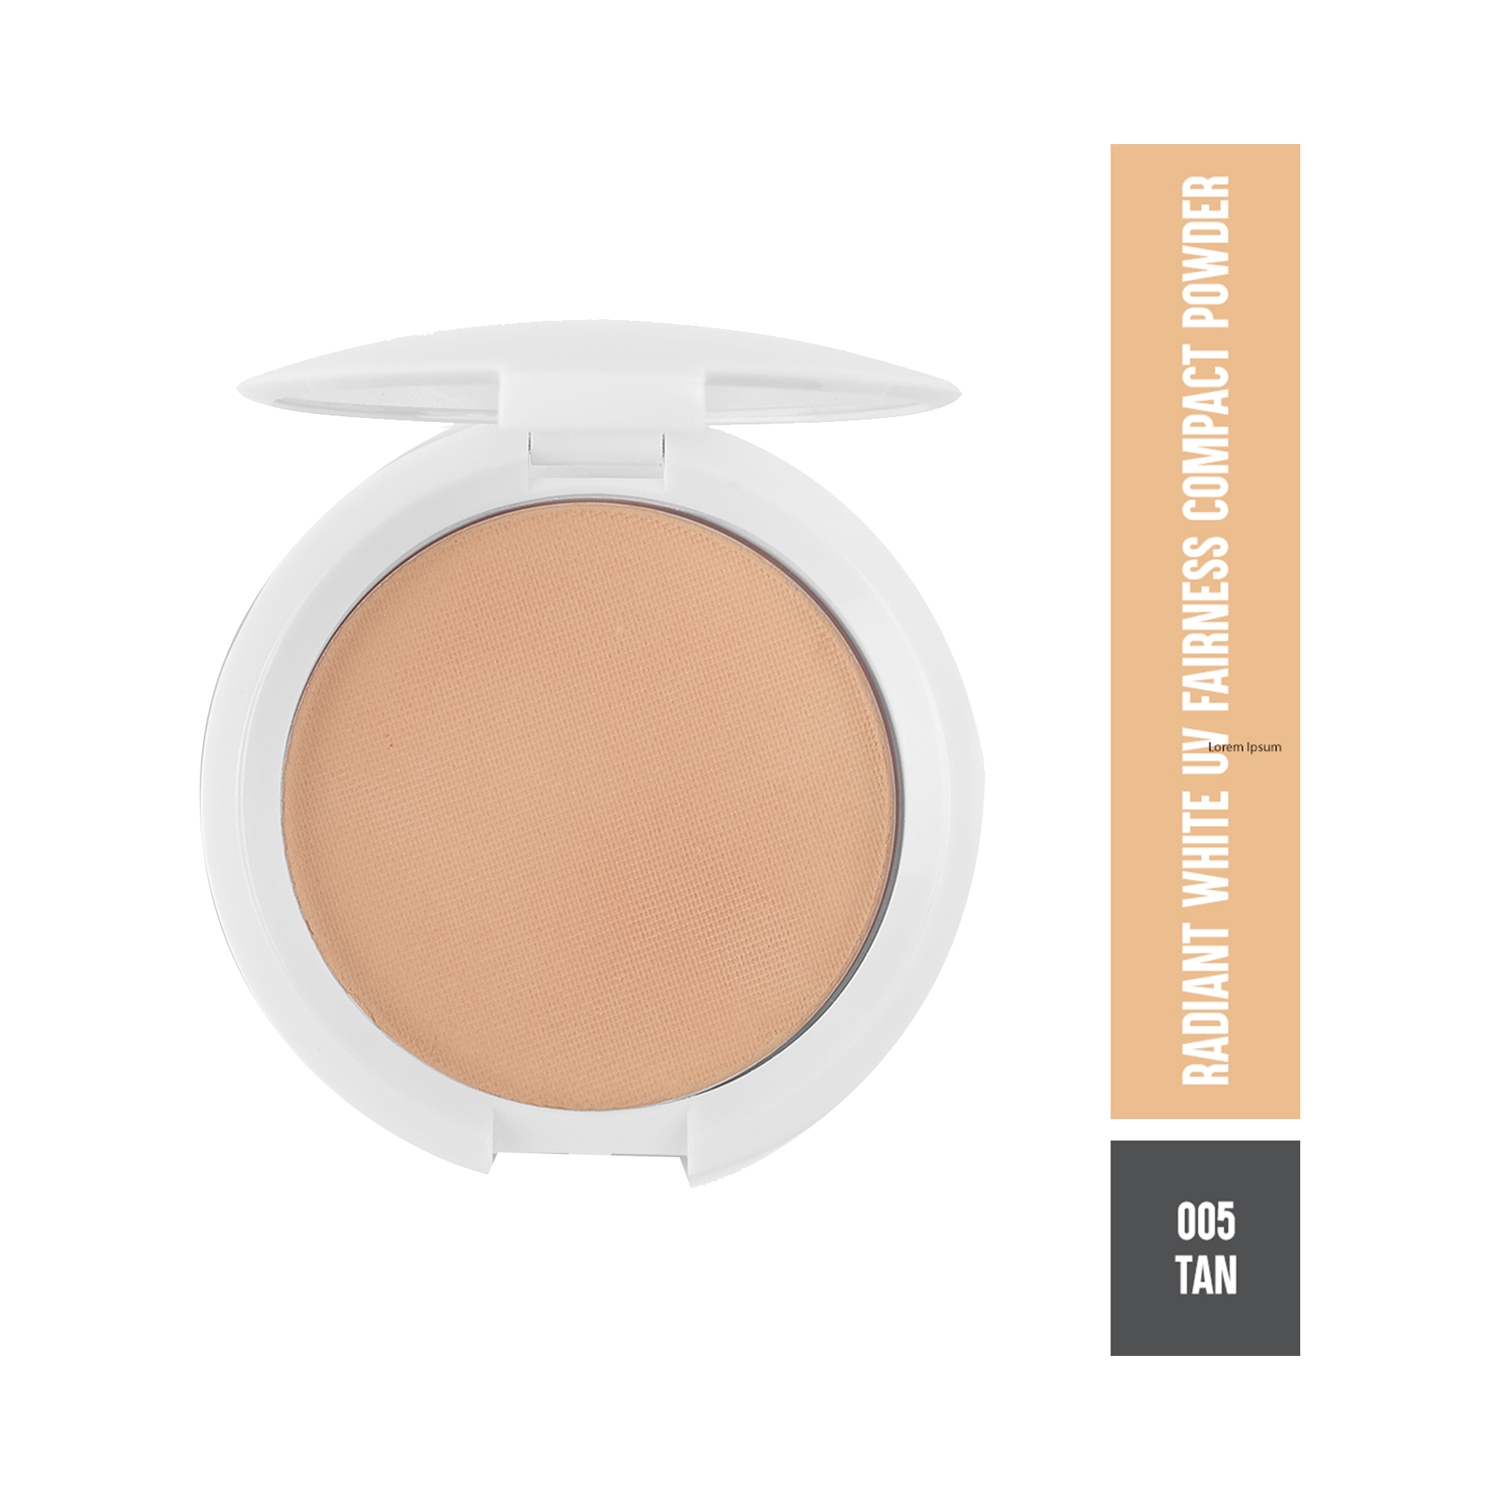 Colorbar | Colorbar Radiant White UV Fairness Compact Powder With SPF 18 - 005 Tan (9g)